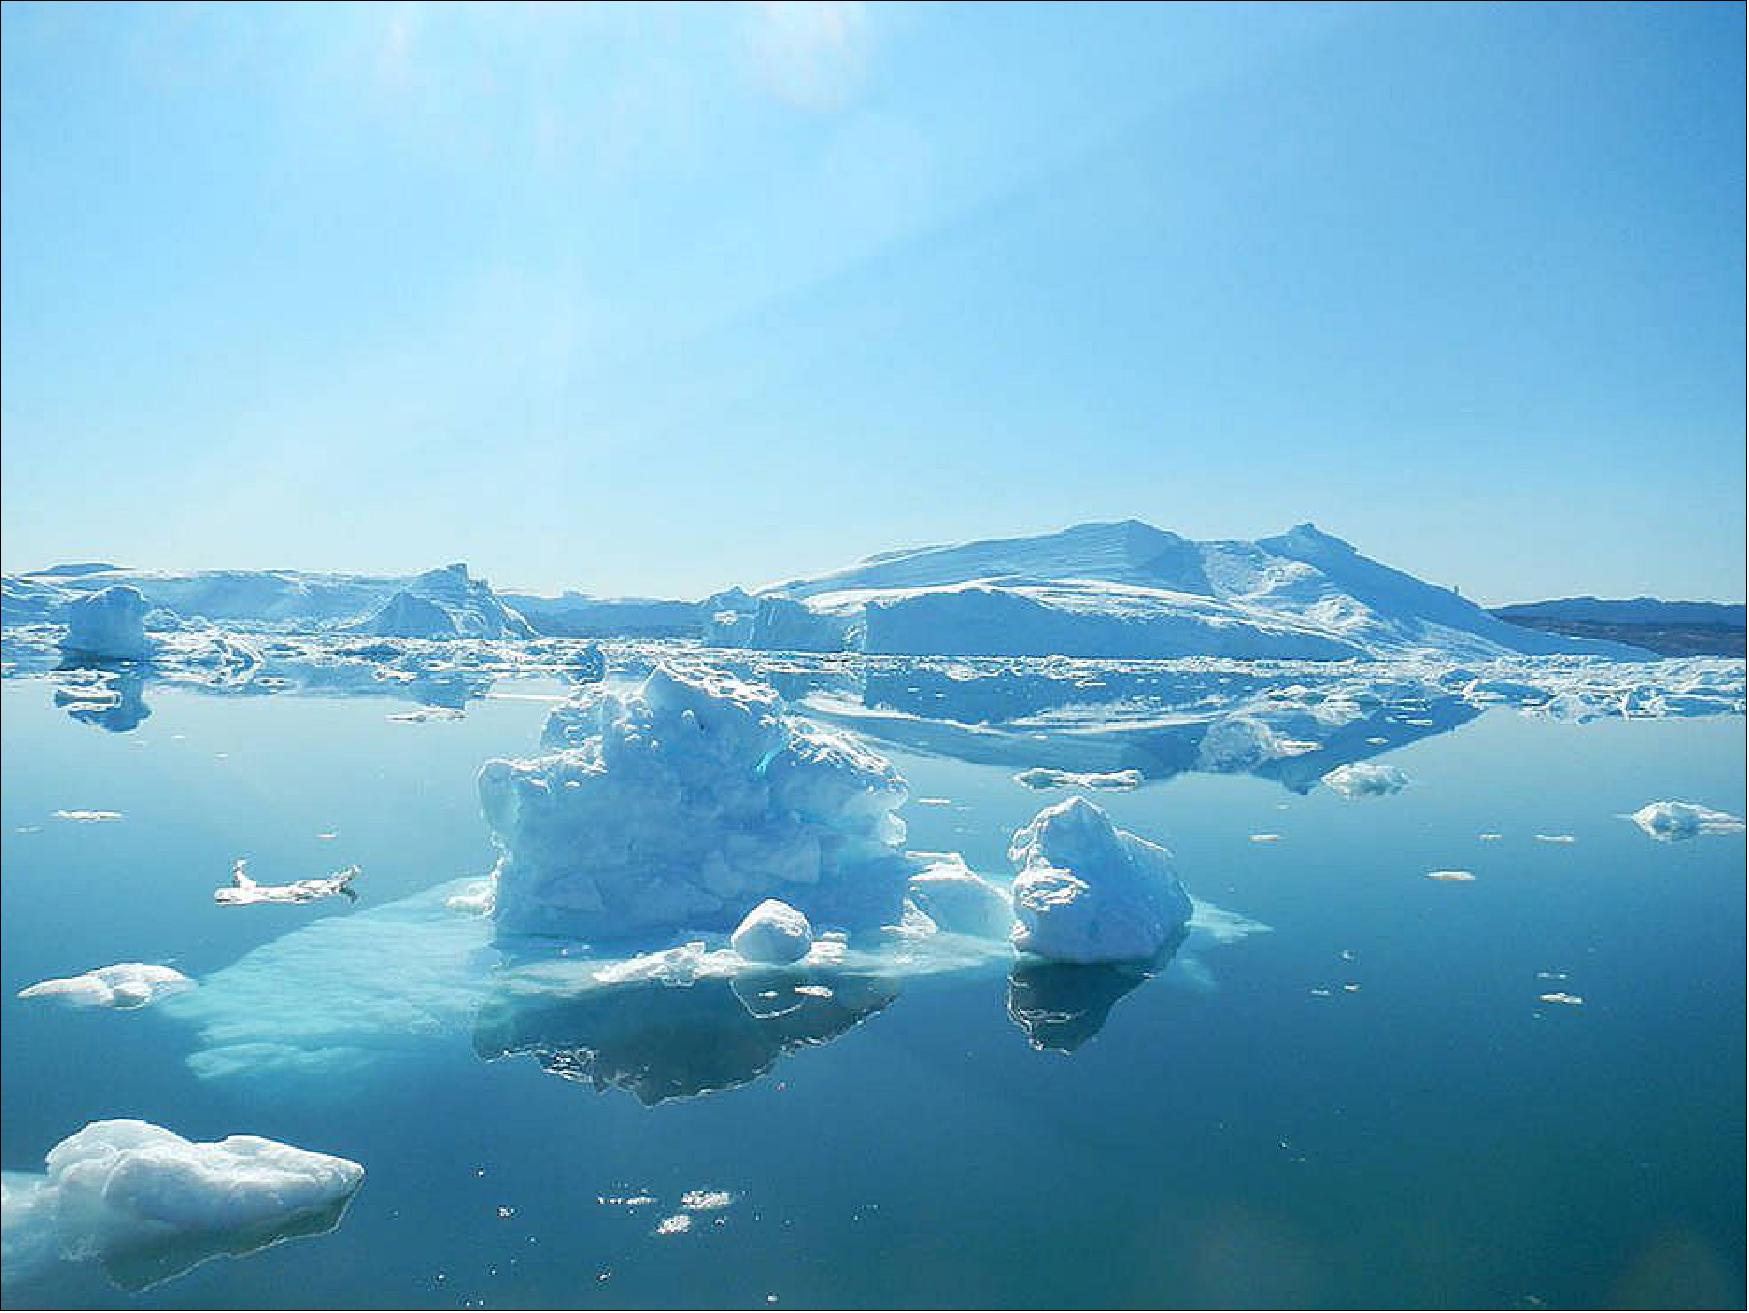 Figure 14: Warmer ocean waters are speeding up the rate at which Greenland's glaciers are melting and calving, or breaking off to form icebergs. This is causing the glaciers to retreat toward land, hastening the loss of ice from Greenland’s Ice Sheet (image credit: NASA/JPL-Caltech)